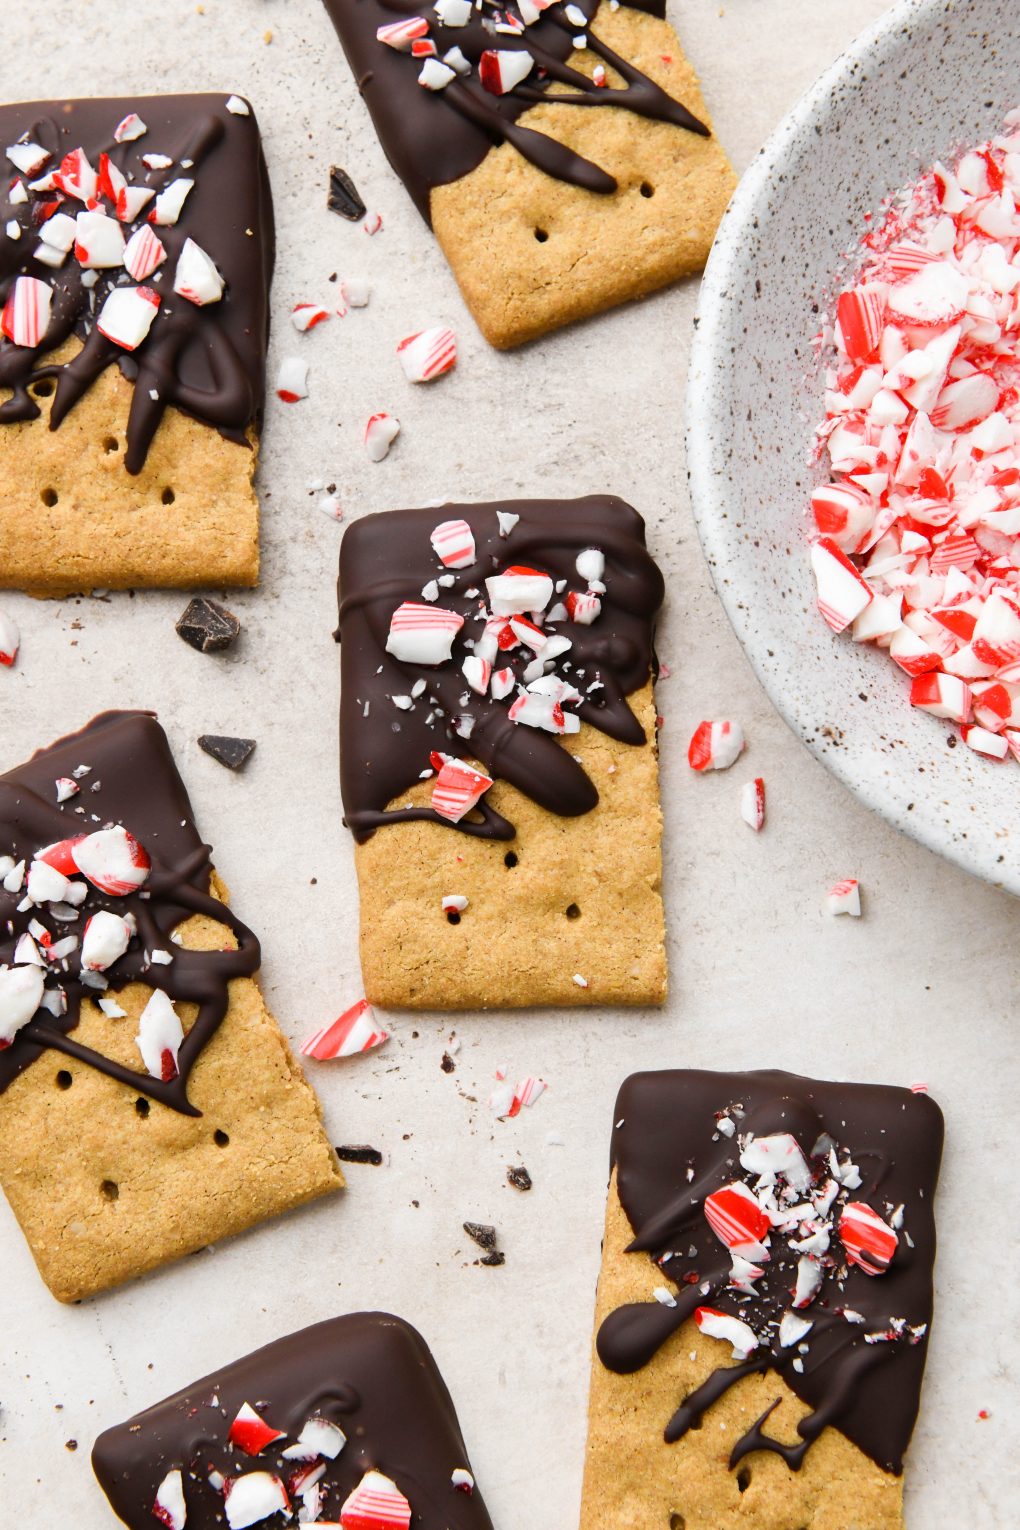 Chocolate dipped graham crackers topped with crushed candy canes on a light brown surface next to a bowl of crushed candy canes.